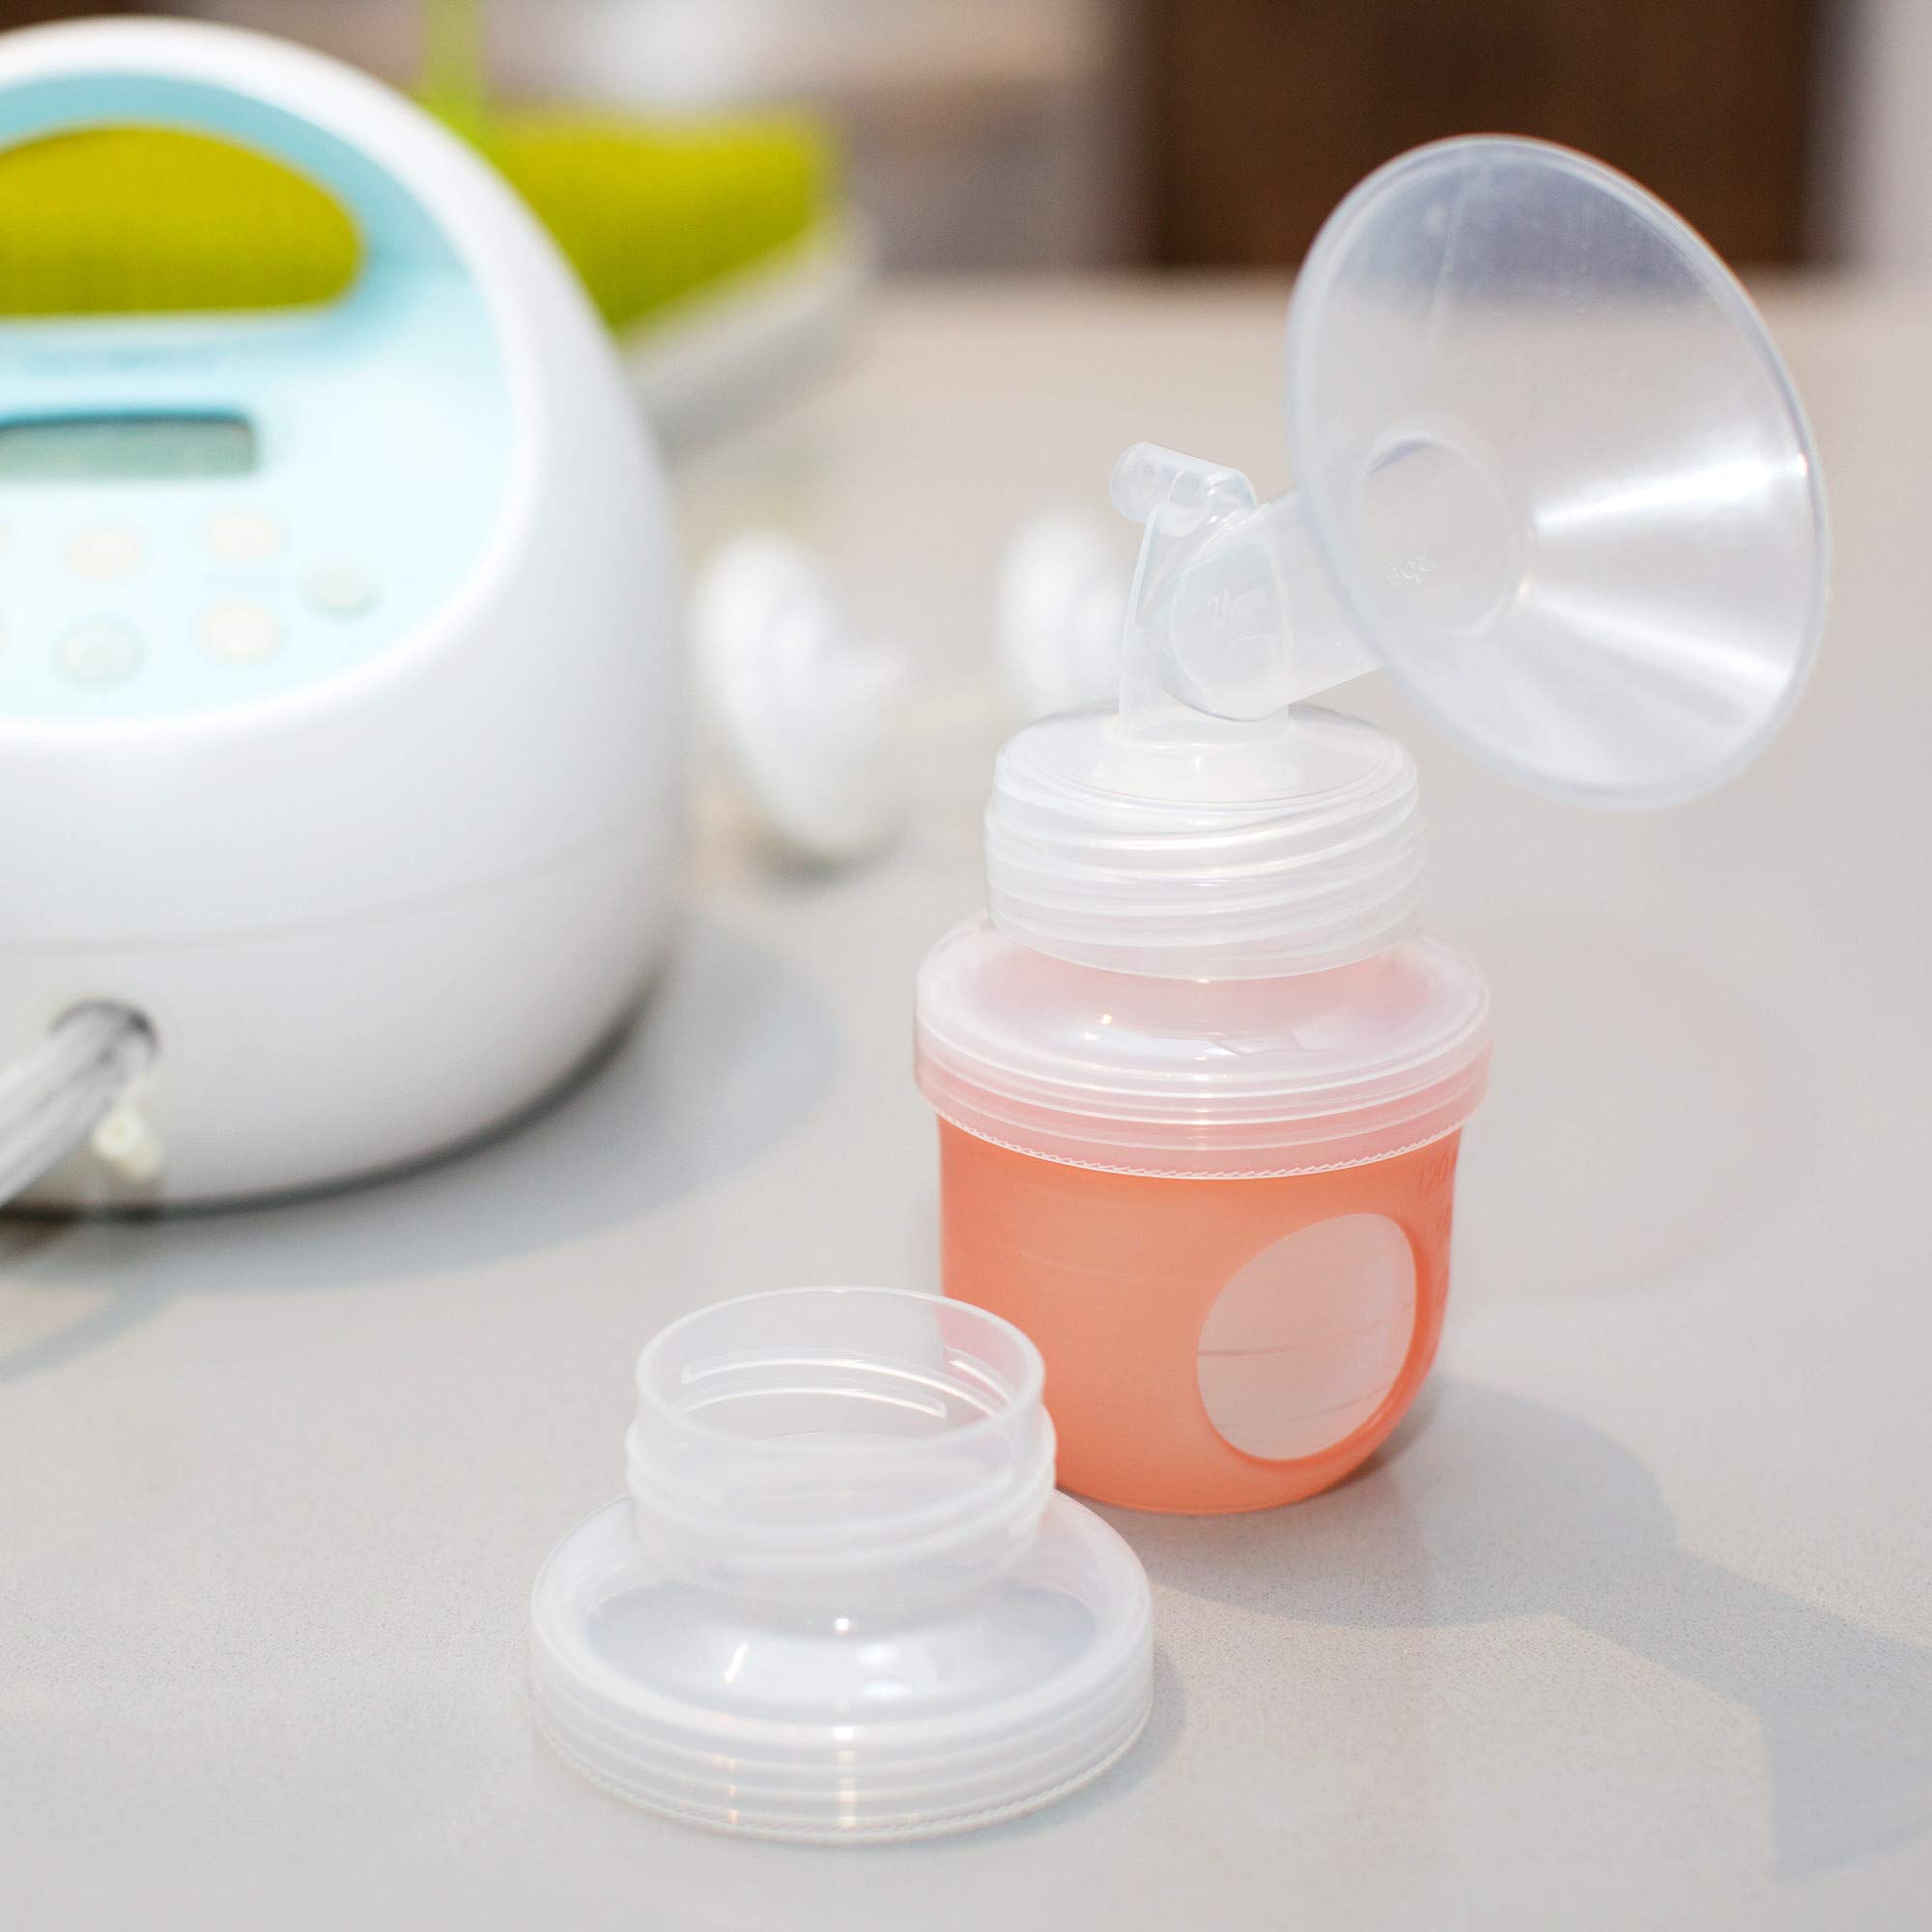 Boon Nursh Wide Neck Breast Pump Adaptor - Works with Spectra and Avent Breast Pumps - Compatible Nursh Bottles - Breastfeeding and Bottle-Feeding Essentials - 2 Count (Pack of 2)